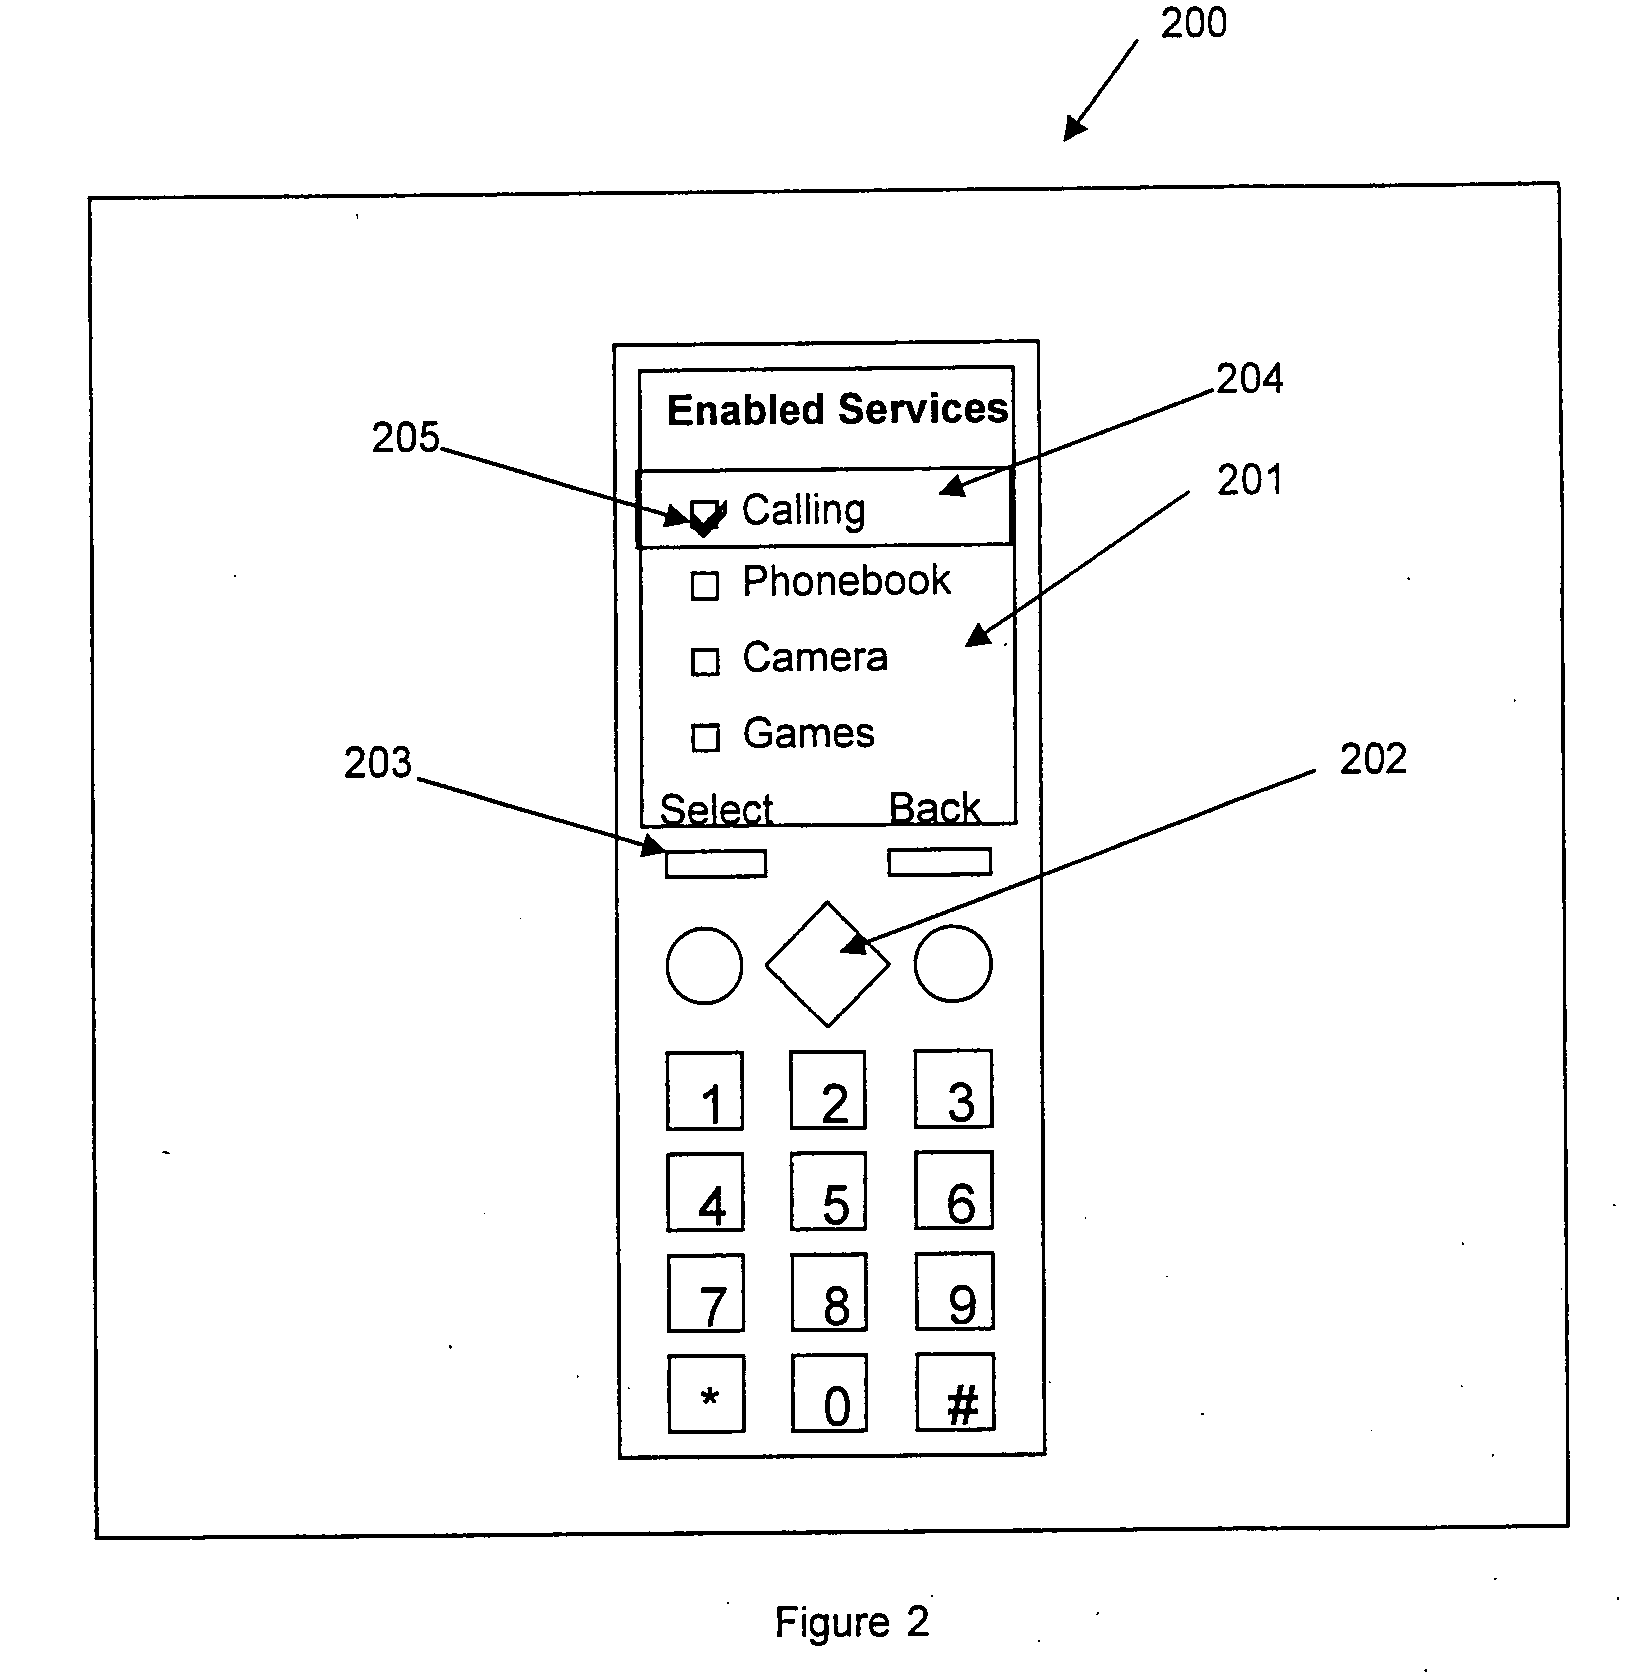 System and method for limiting access to features in a mobile telecommunications device